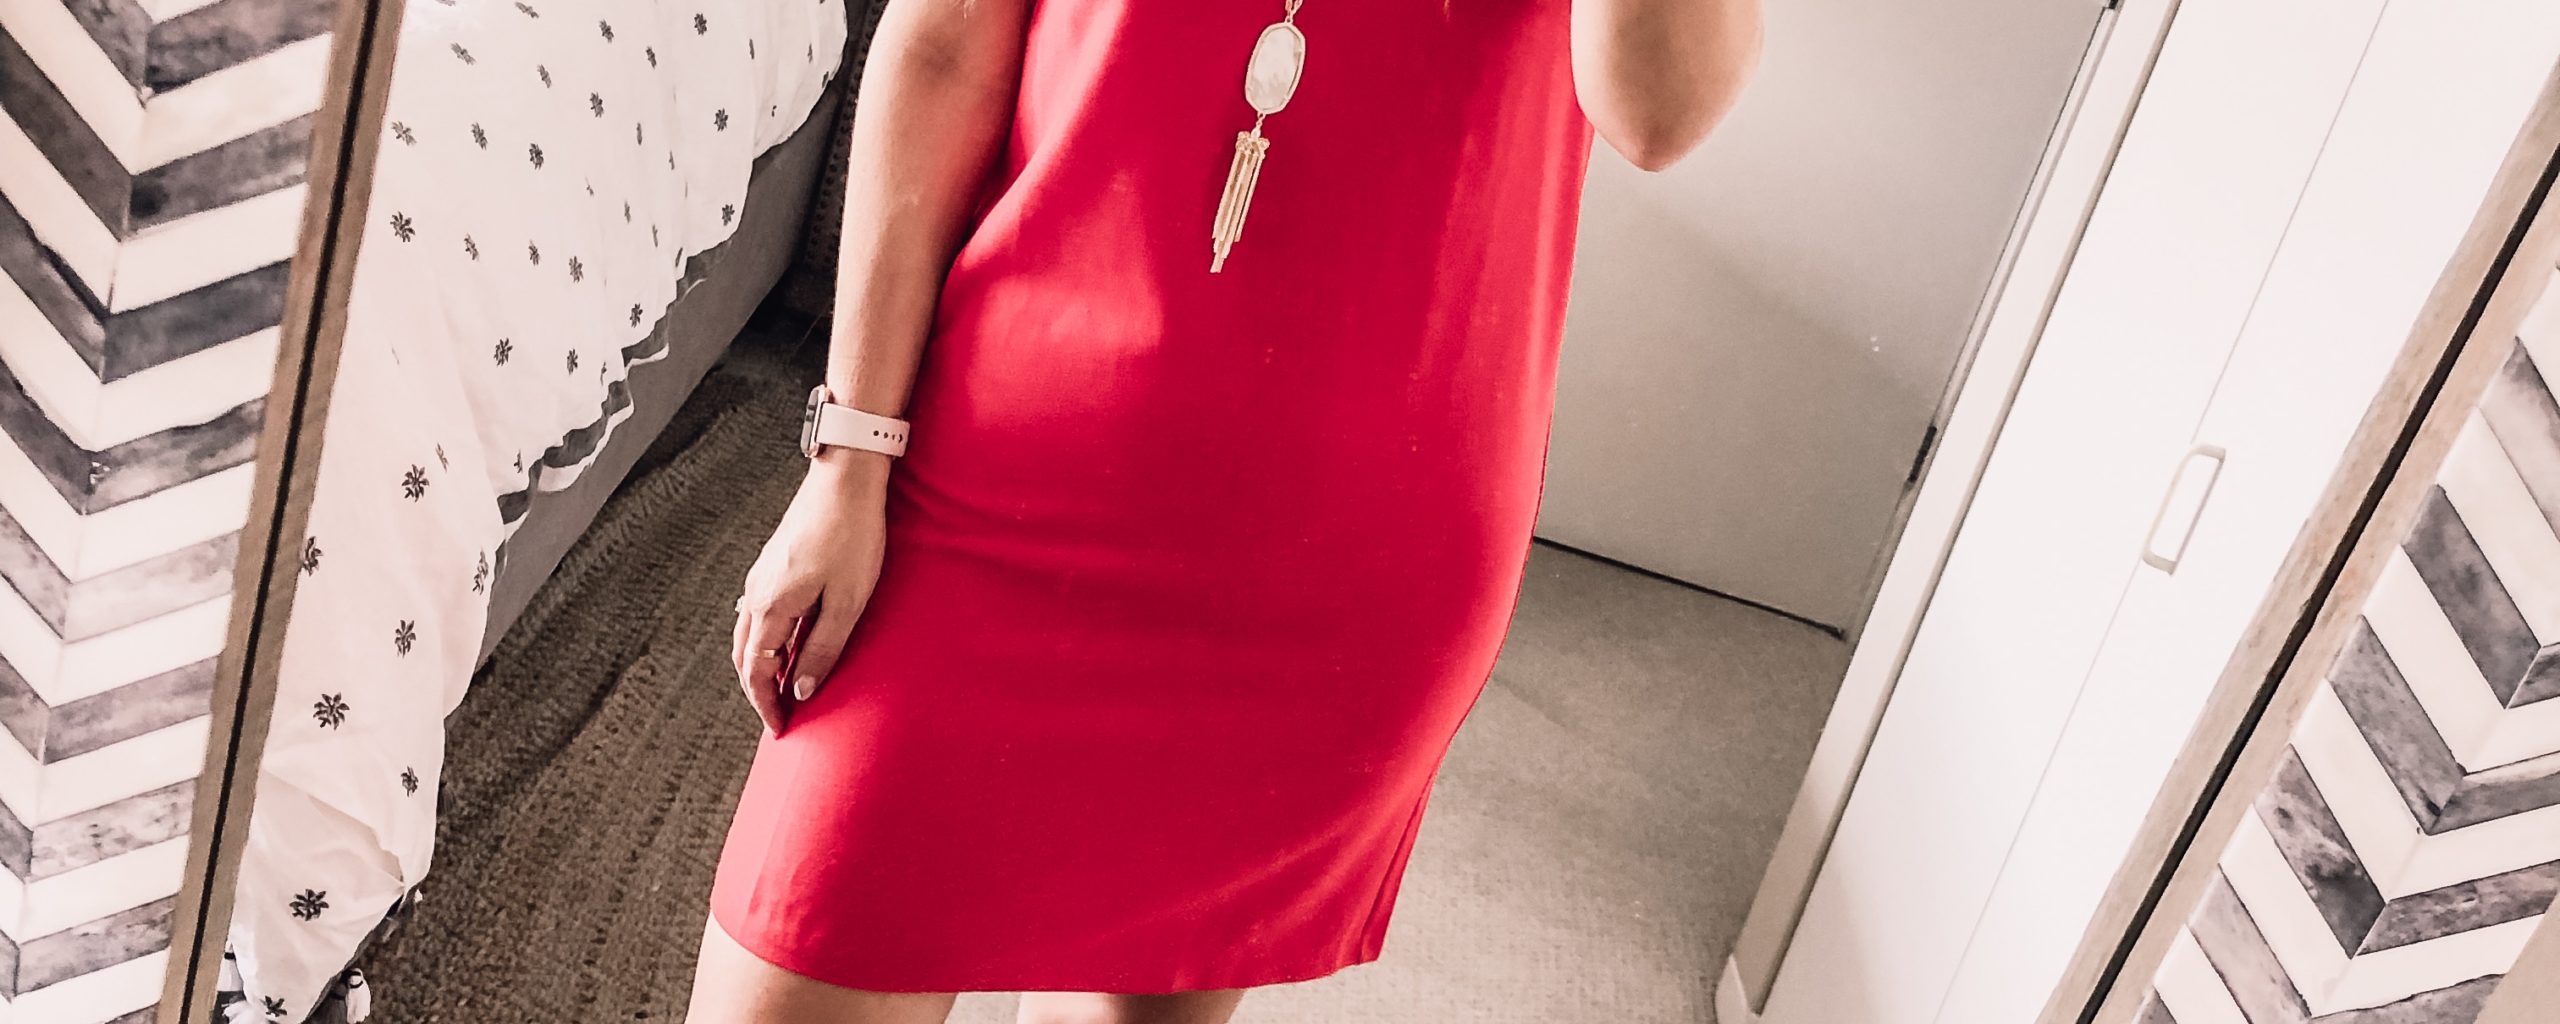 Red shift dress for the office